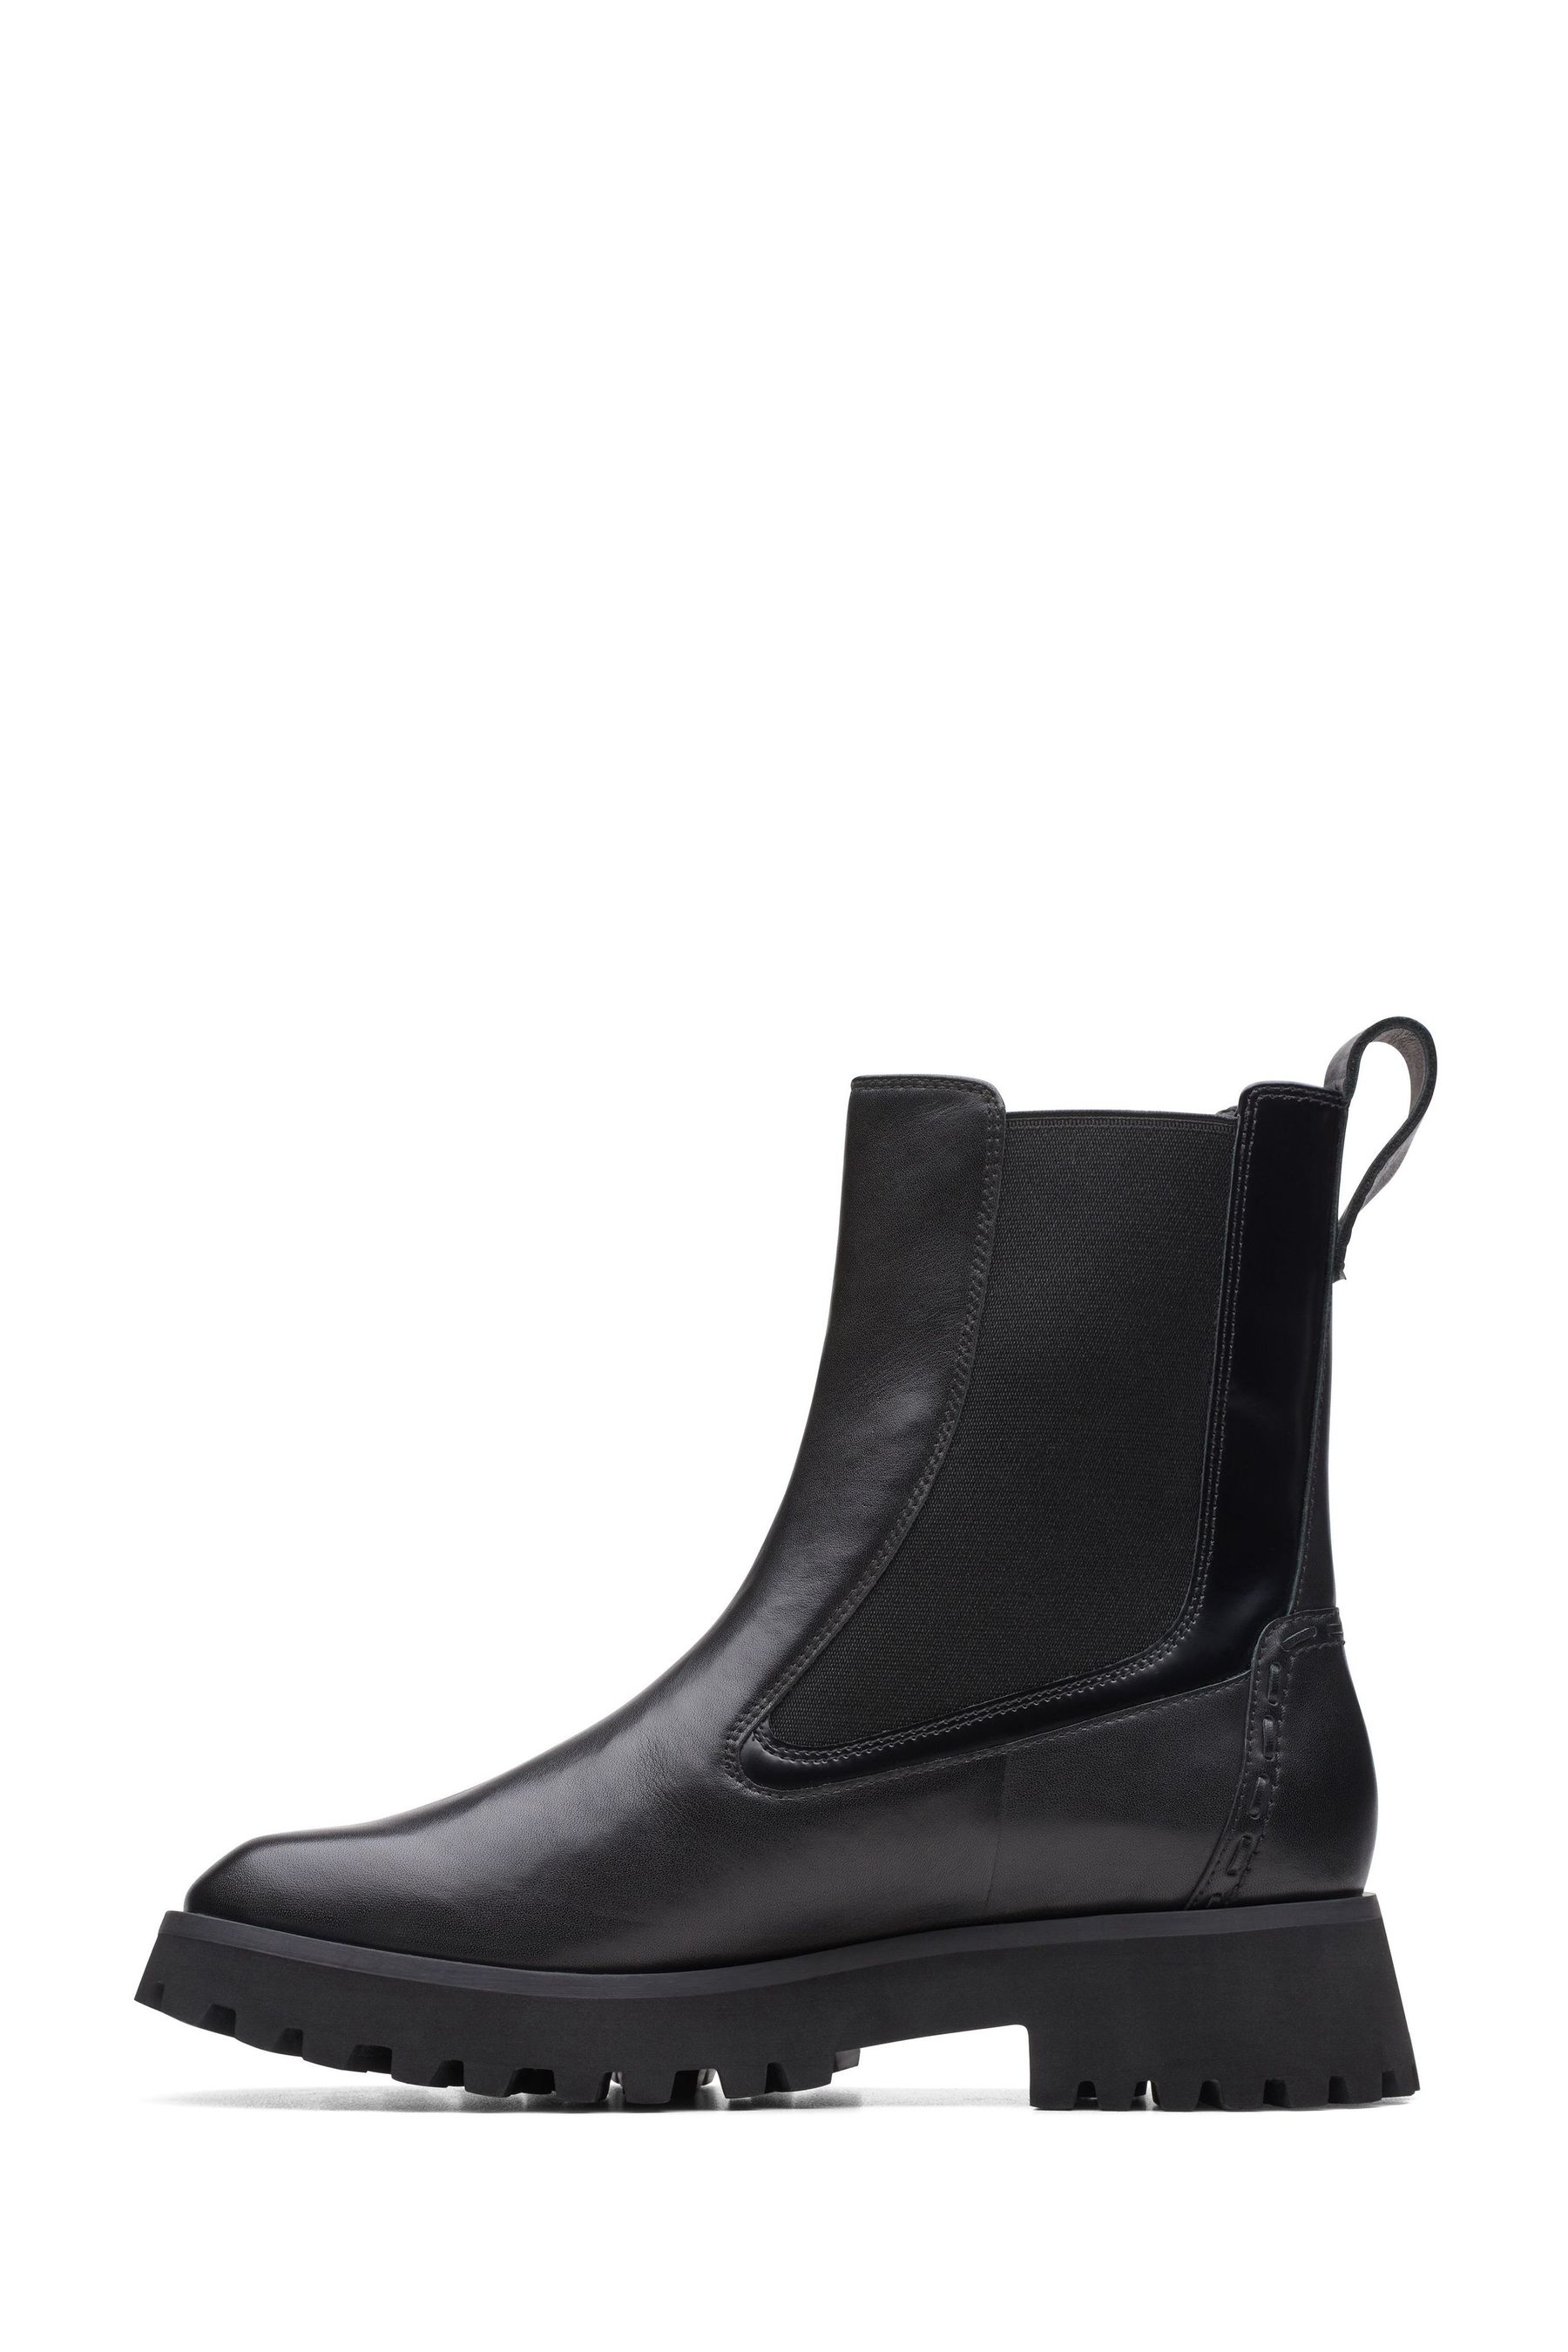 Buy Clarks Black Leather Stayso Rise Boots from the Next UK online shop